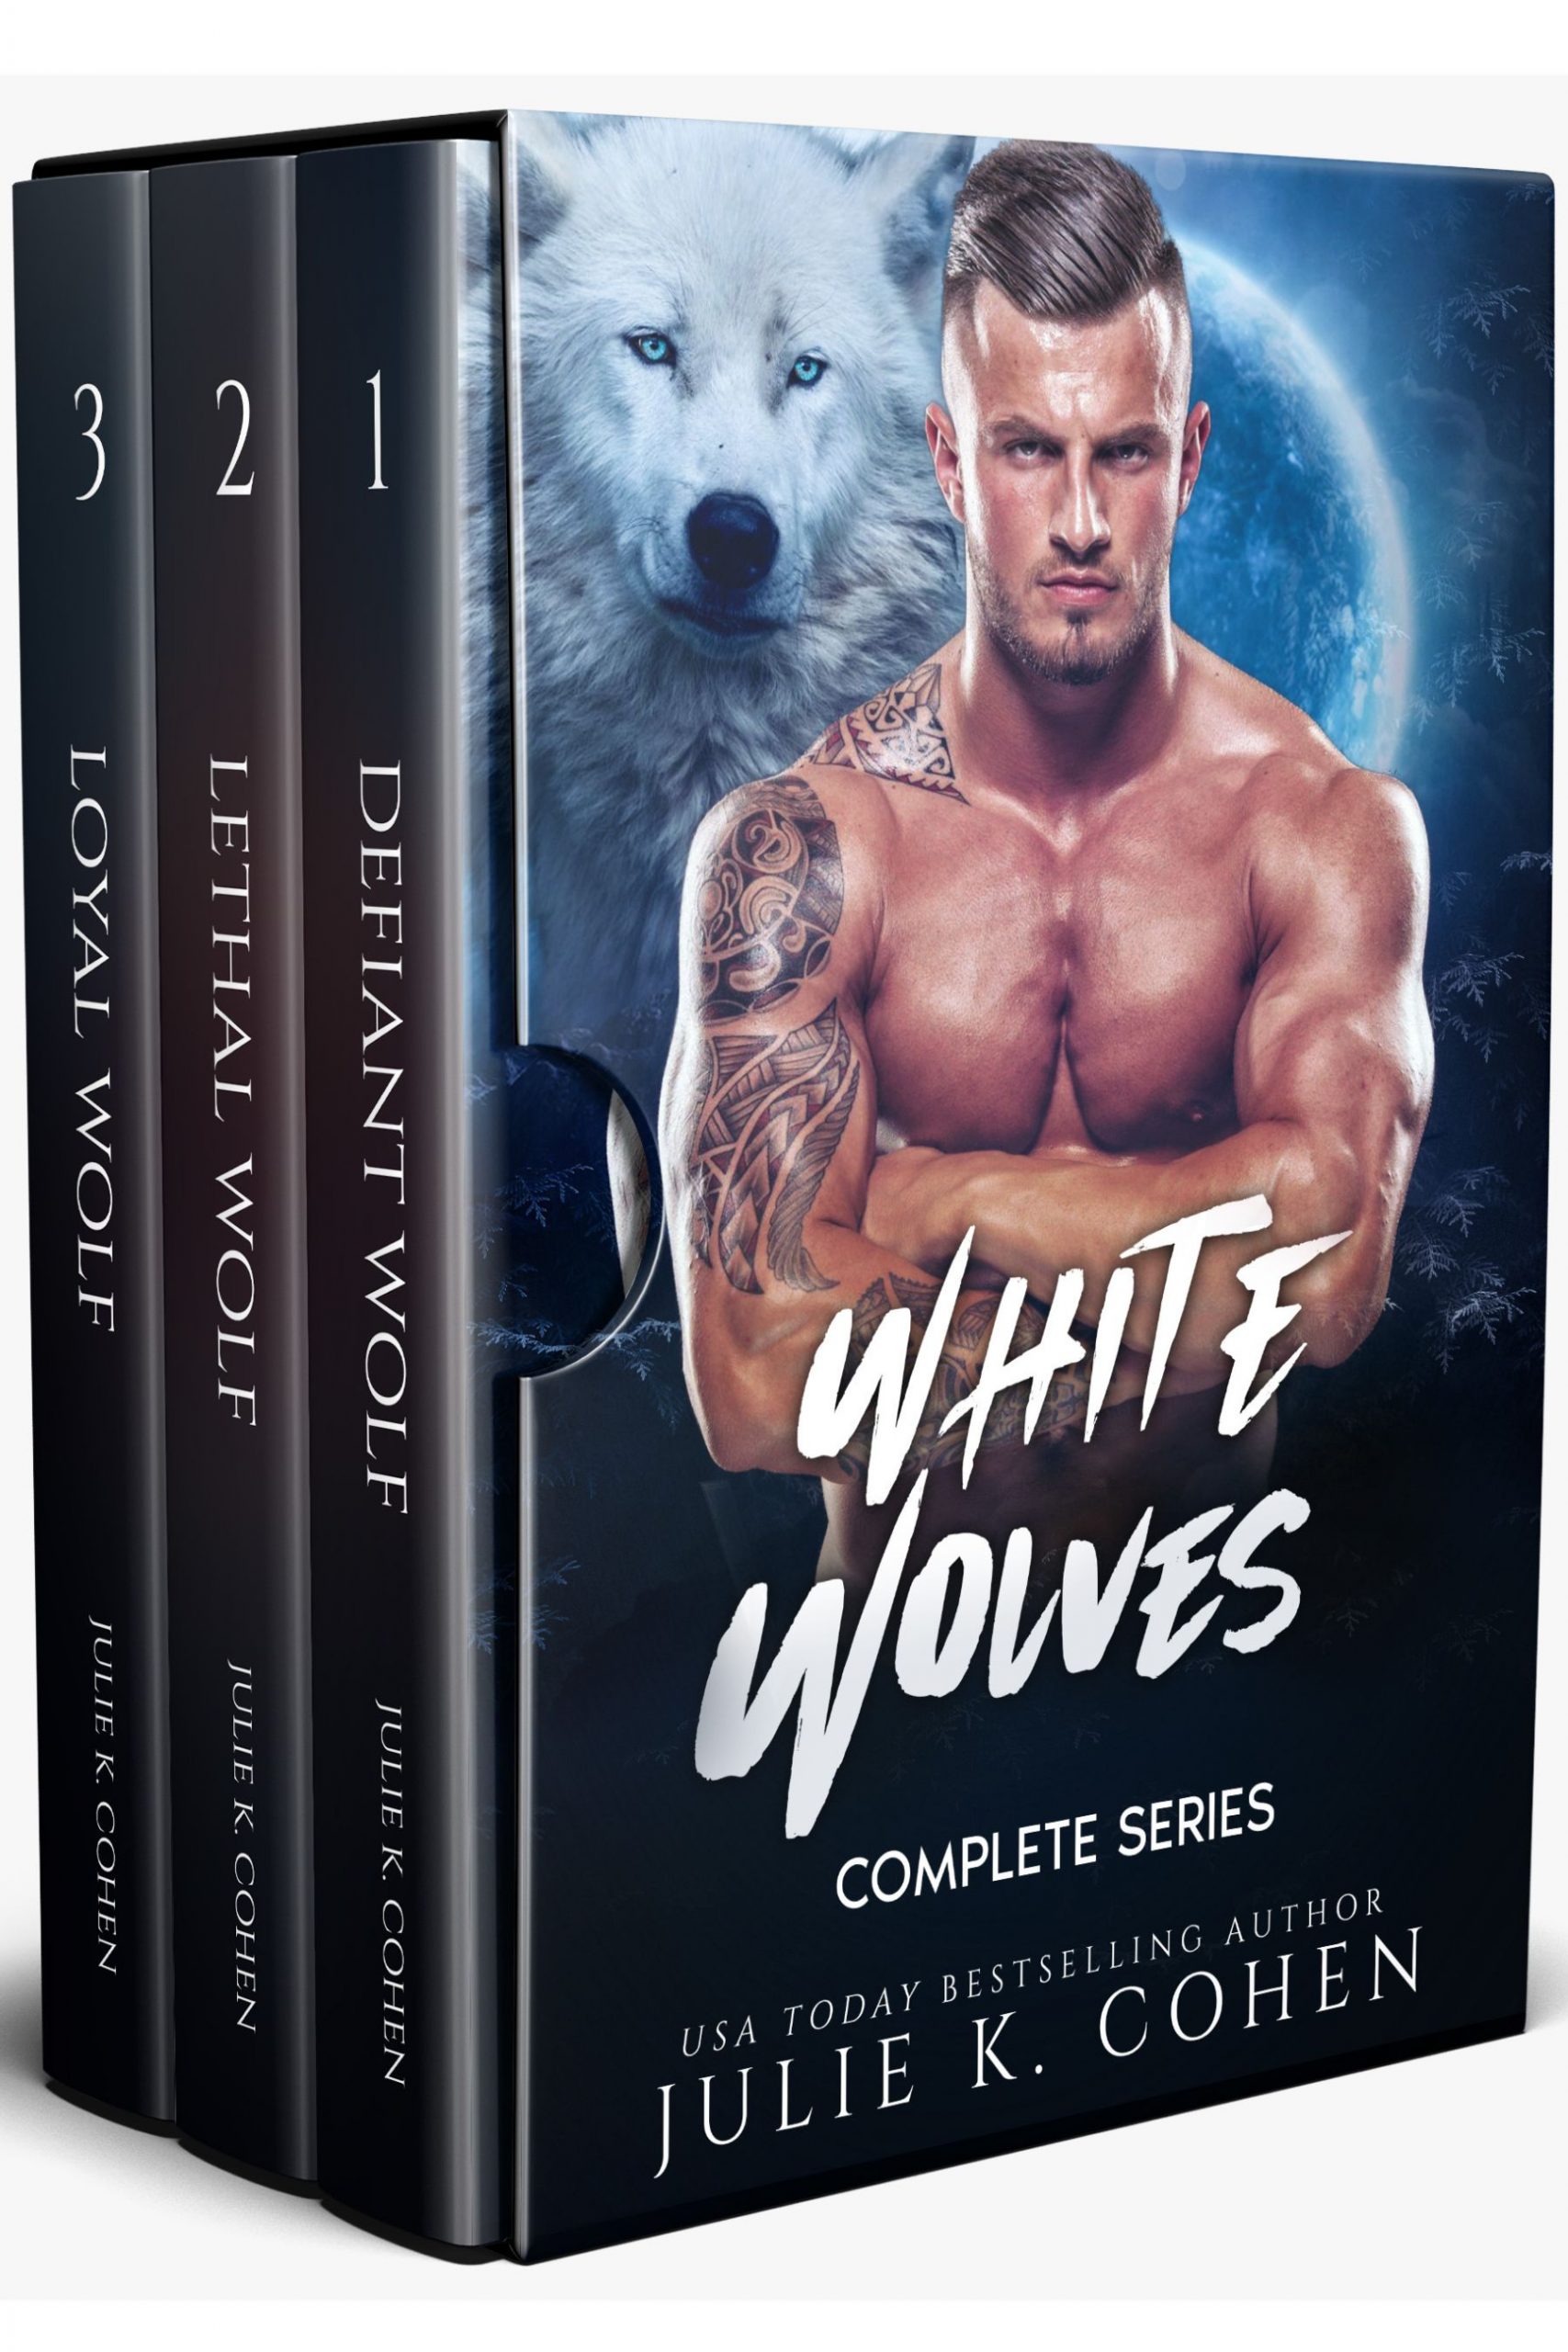 Box Set for digital edition of White Wolves series